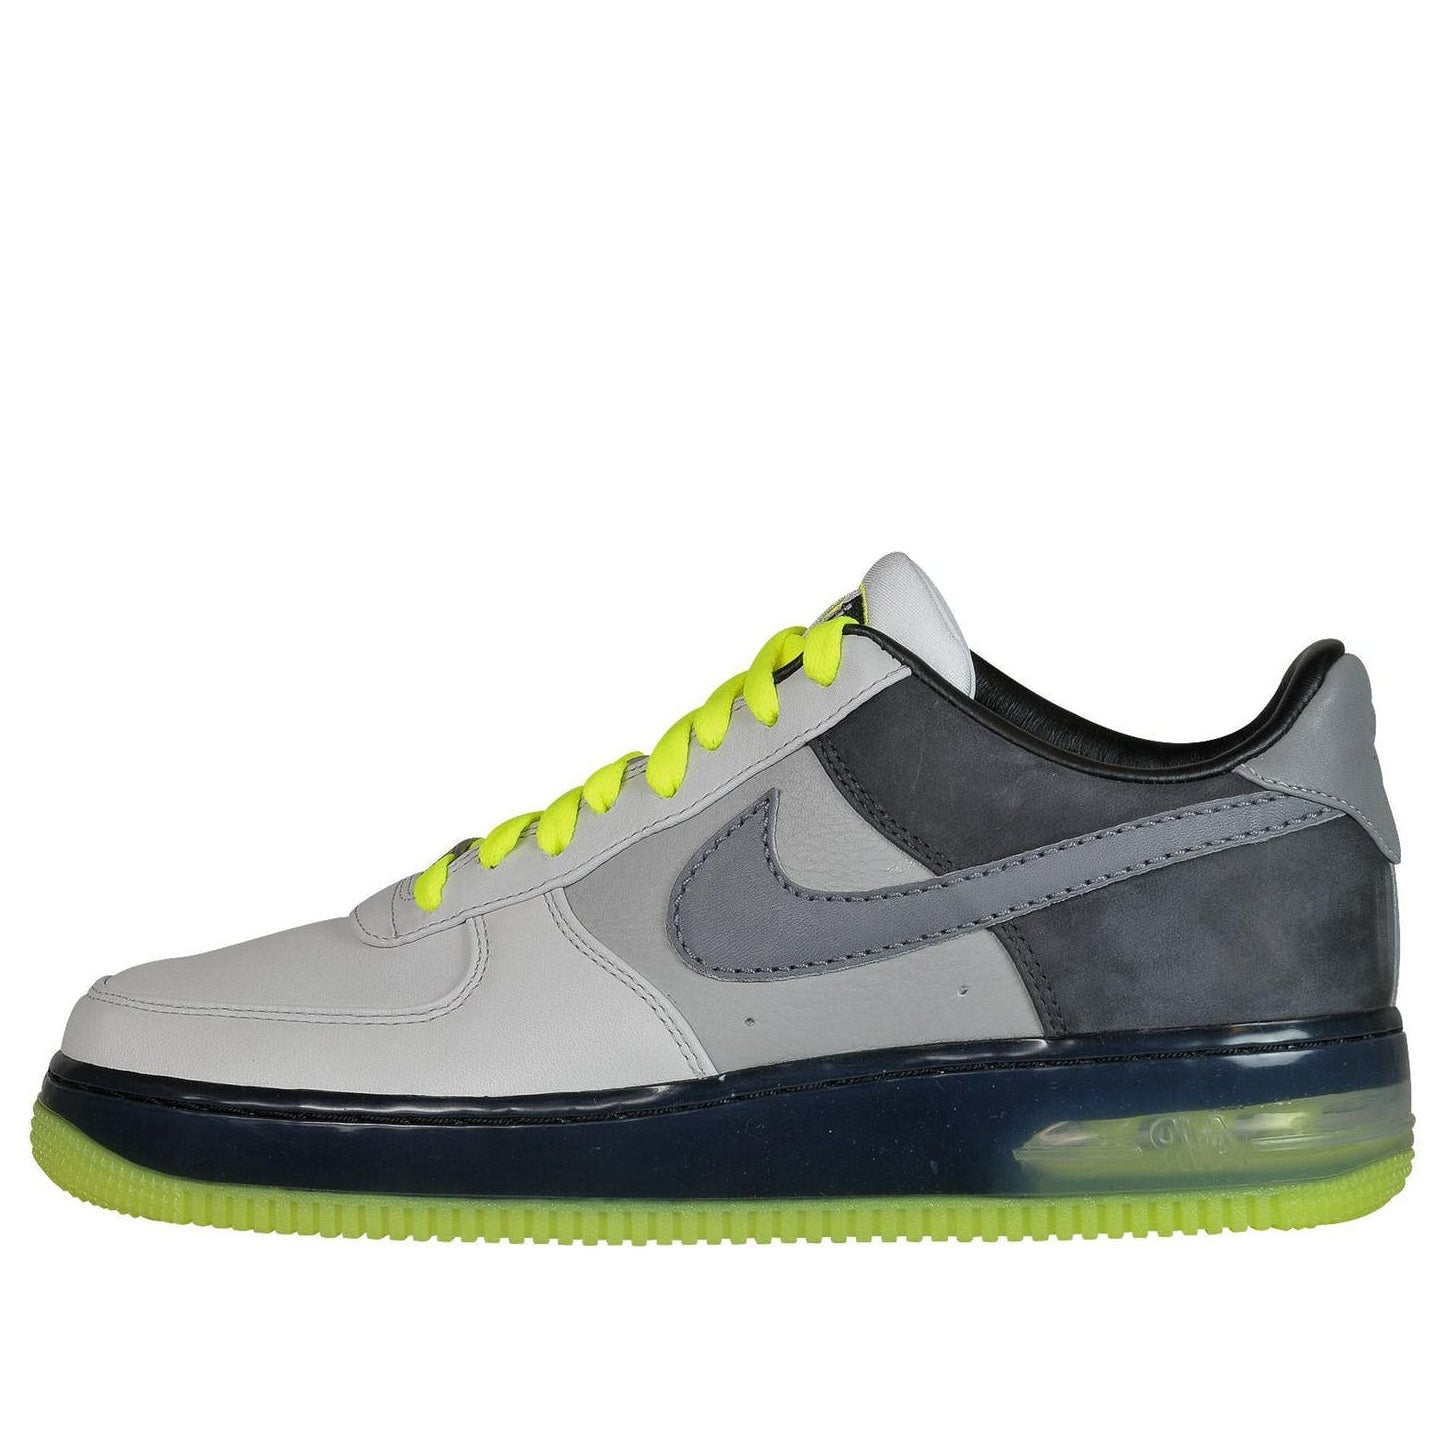 Nike Air Force 1 Supreme Max Air 'Air Max 95' neutral grey/graphite/anthracite-neon yellow 318772-001 sneakmarks